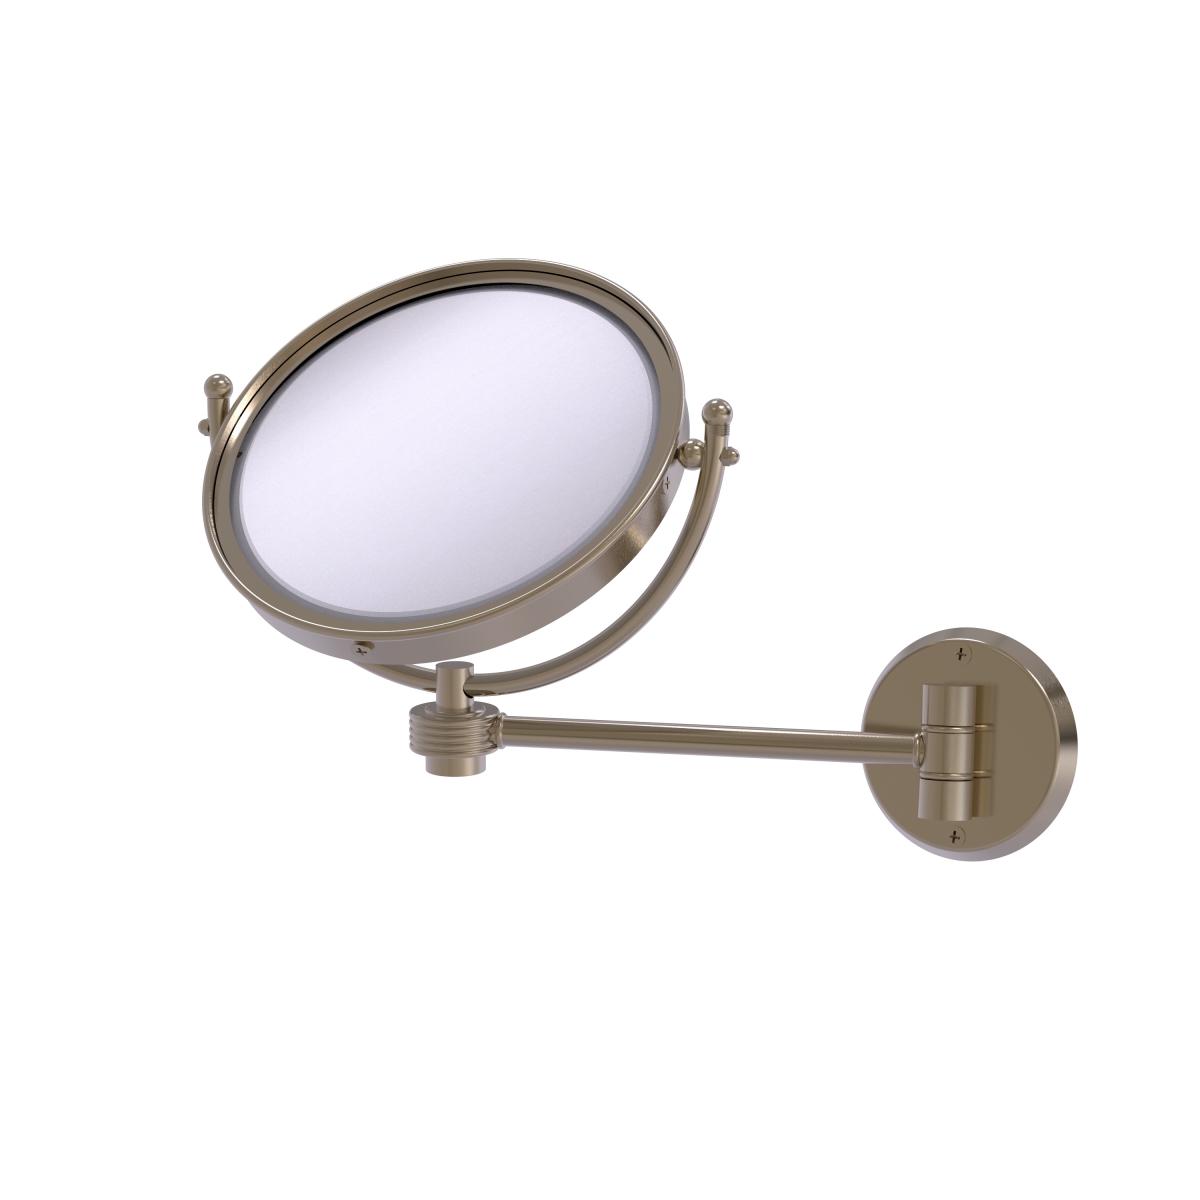 WM-5G-2X-PEW 8 in. Wall Mounted Make-Up Mirror 2X Magnification, Antique Pewter - 10 x 8 x 11 in -  Allied Brass, WM-5G/2X-PEW